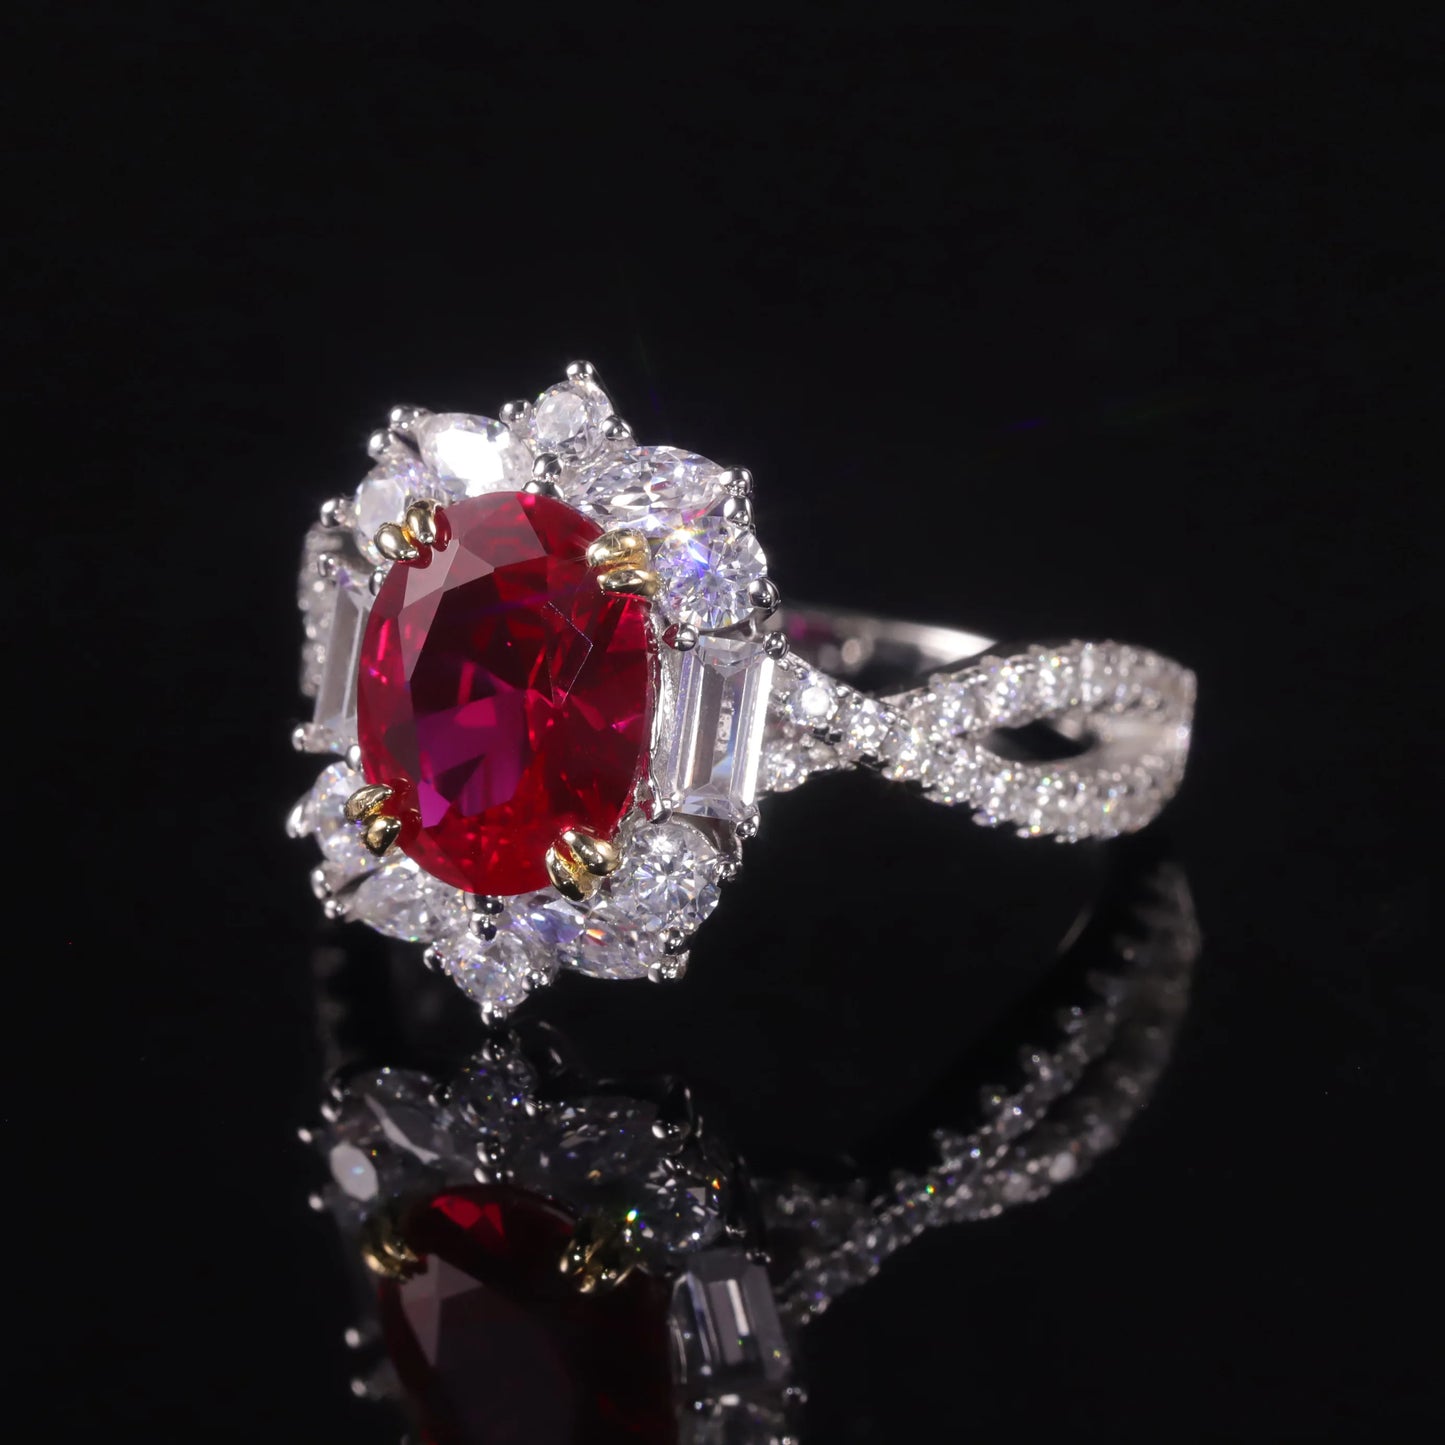 GEM'S BALLET Vintage Style 7x9mm Oval Lab Created Ruby Cocktail Ring 925 Sterling Silver Wedding Bridal Rings For Women